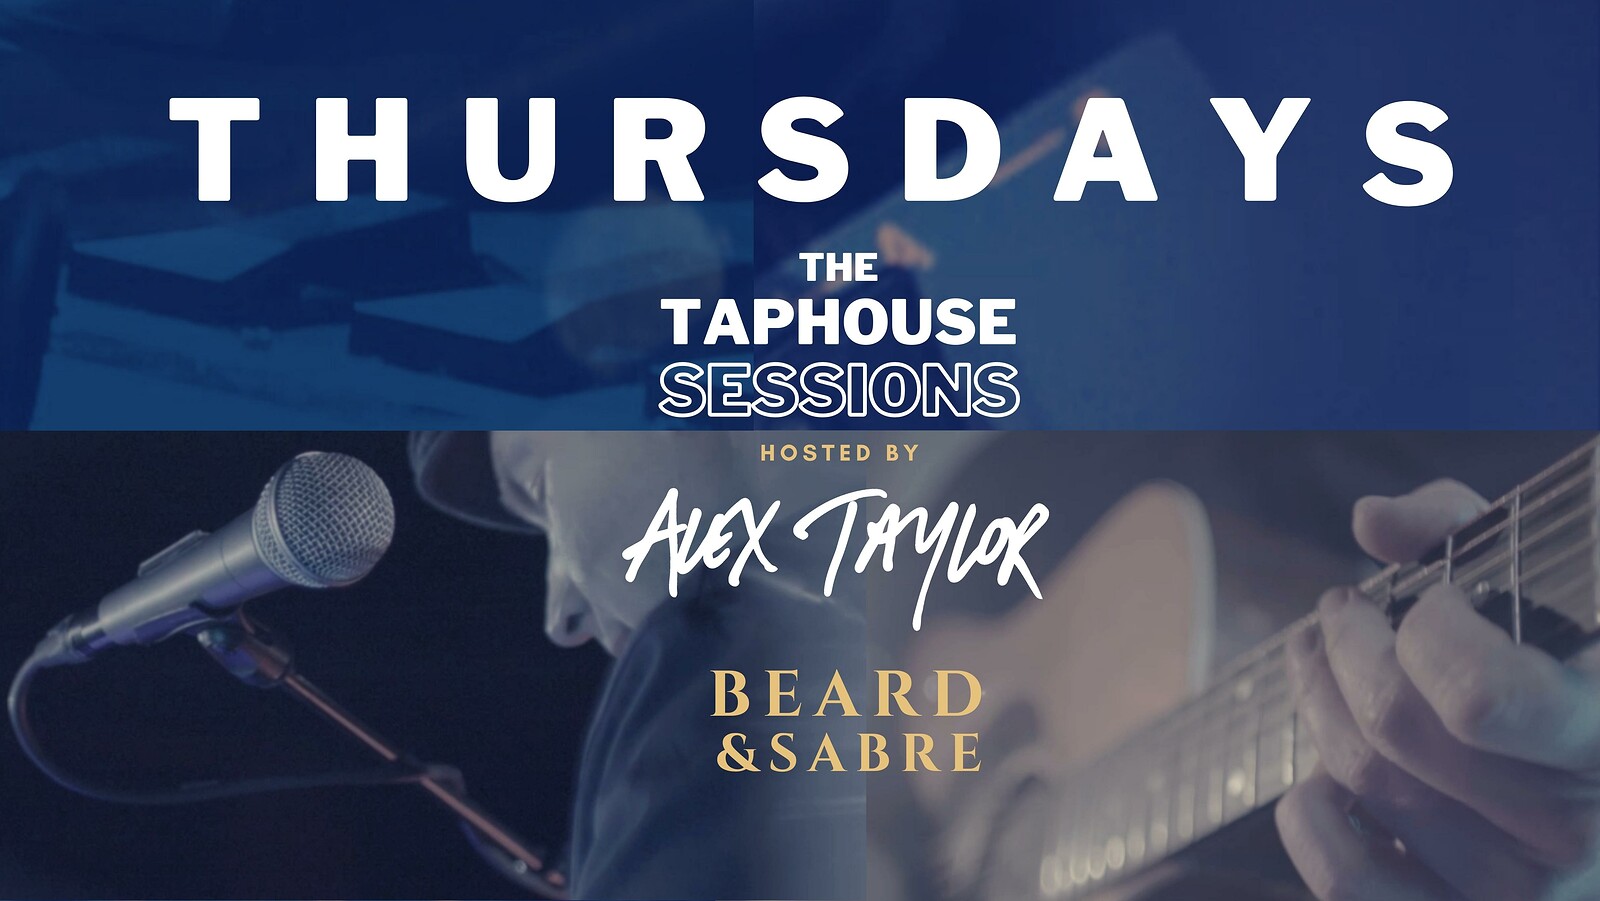 The Taphouse Sessions feat. MIKE BESS at Beard & Sabre